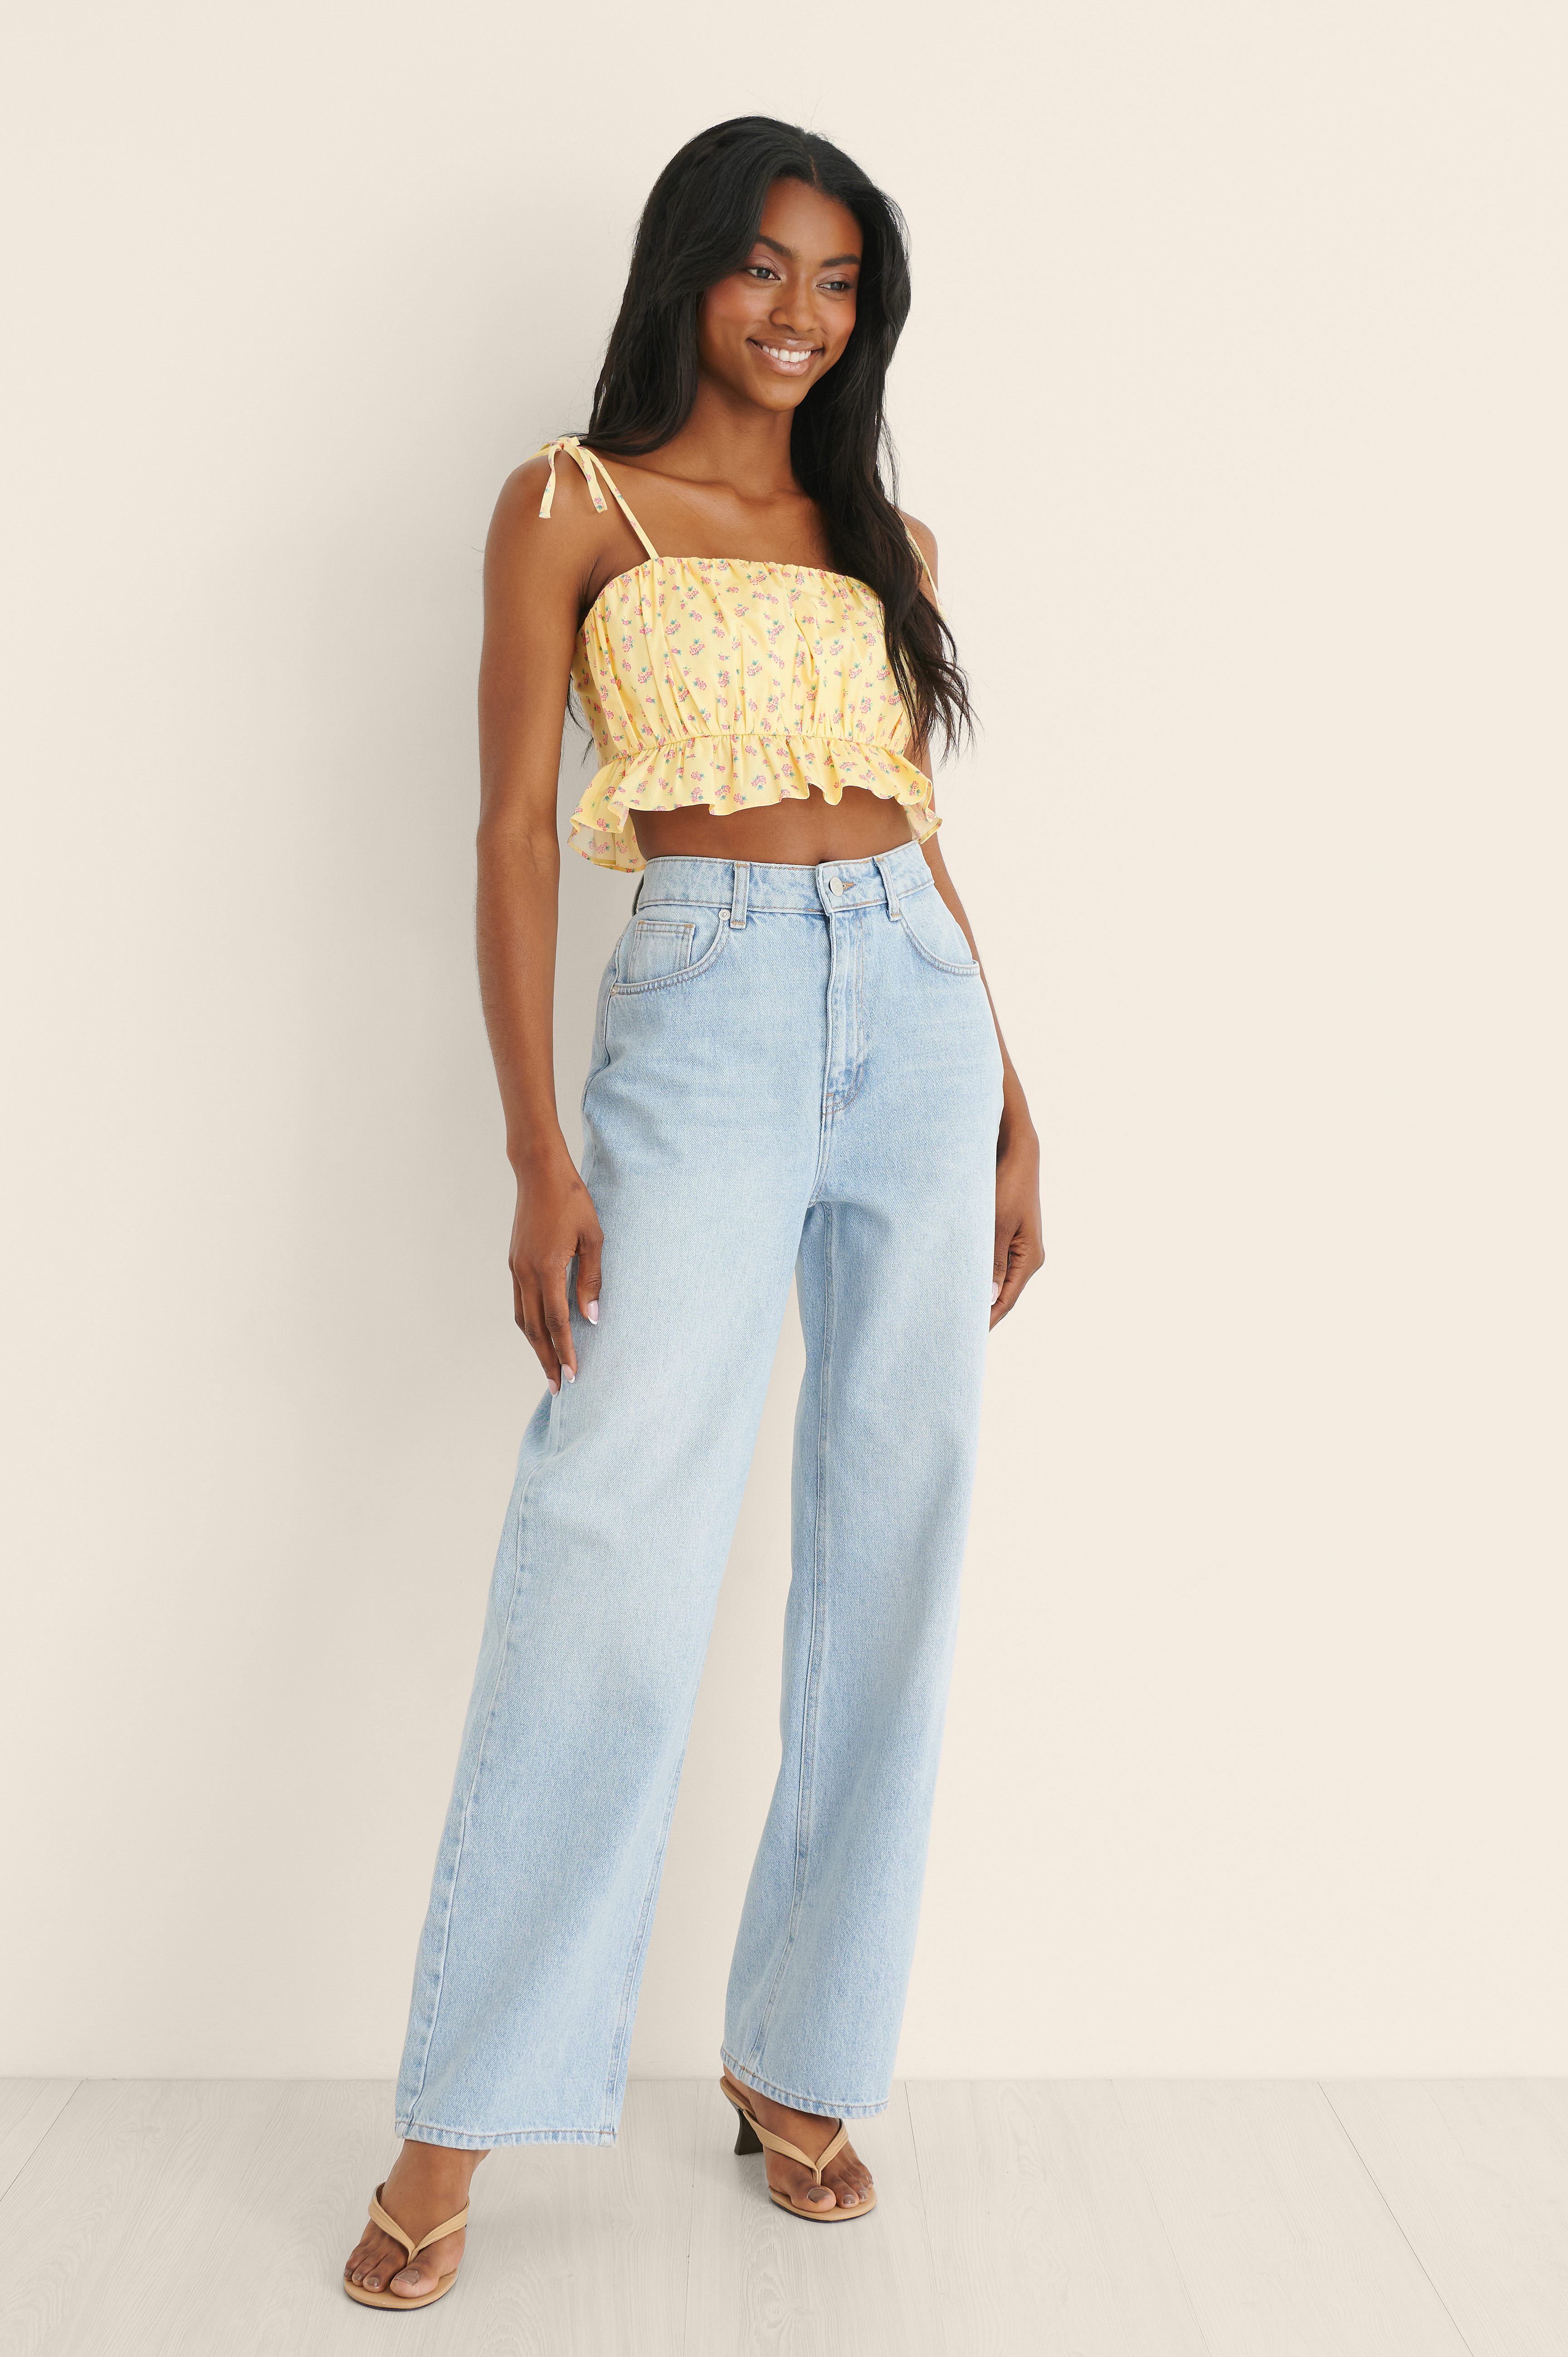 Cropped Frill Top Outfit